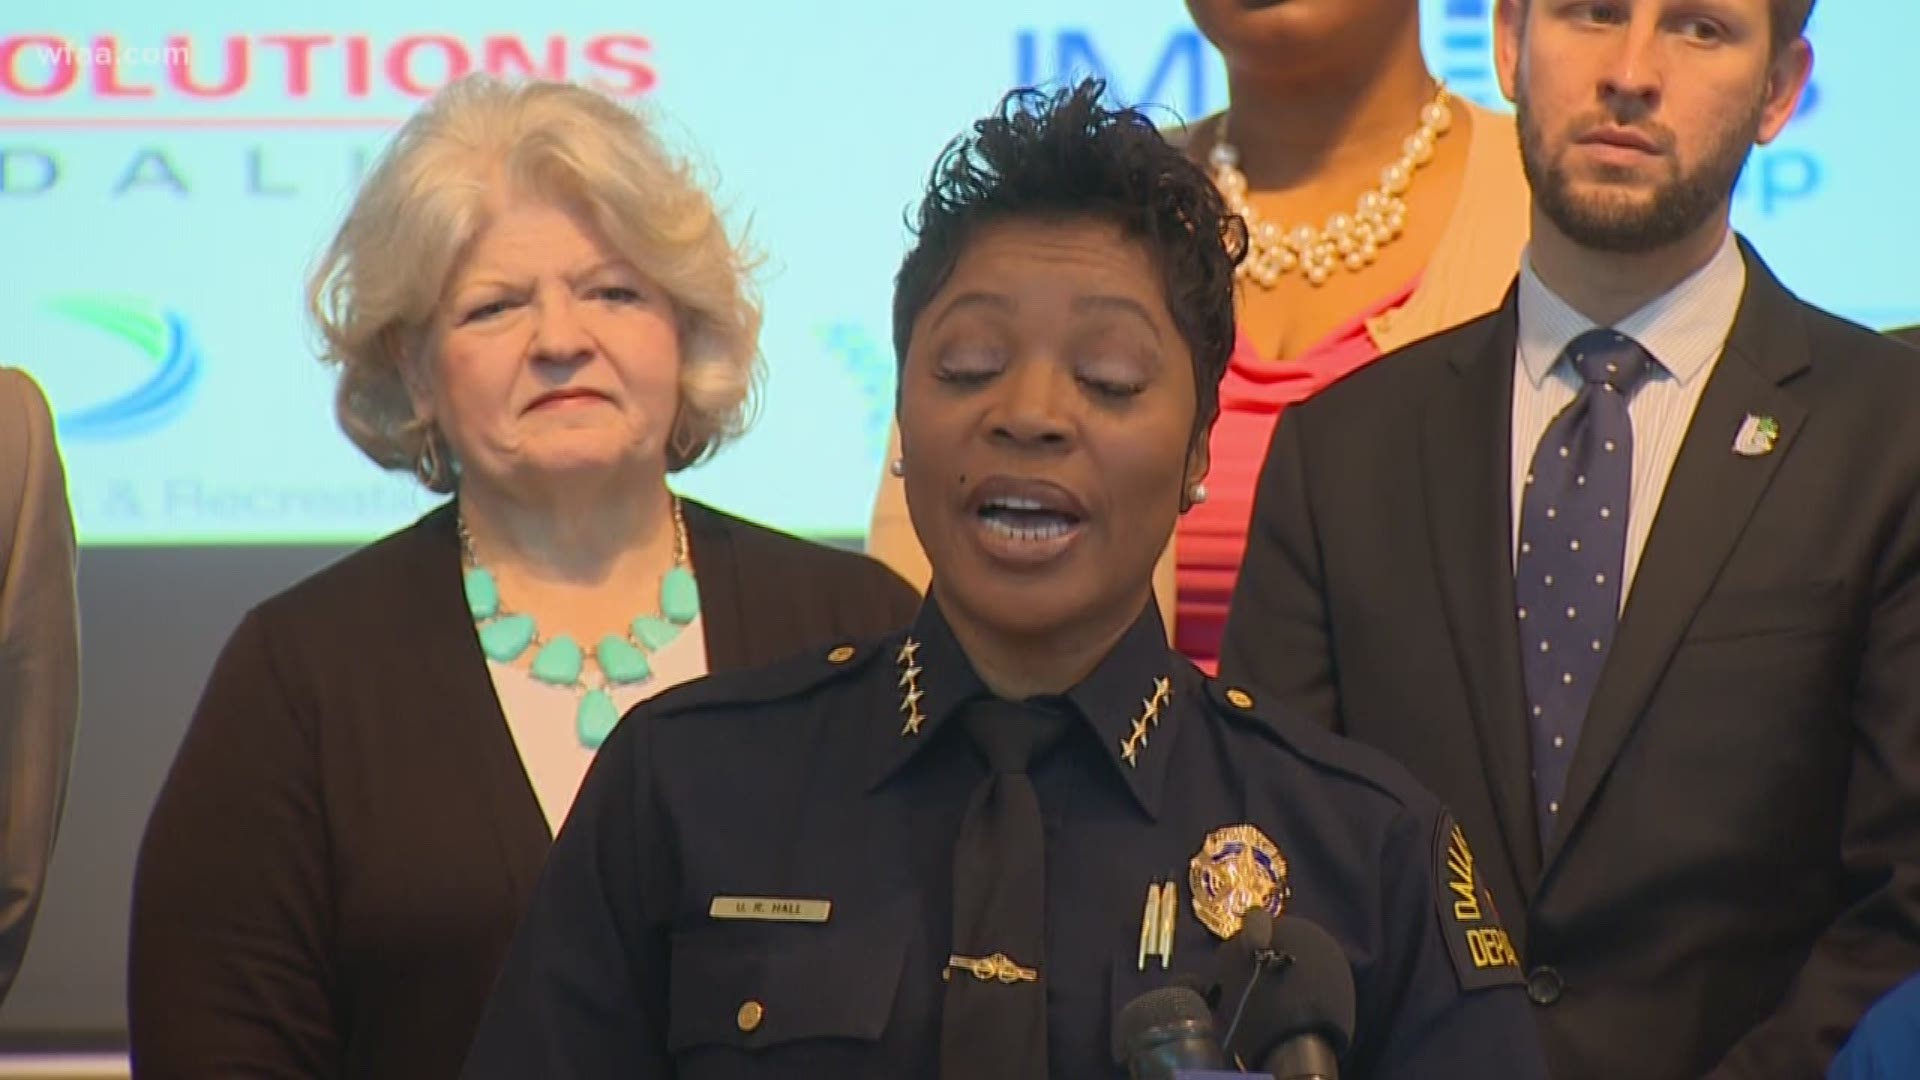 "We want to give them opportunities,” Chief Hall said.